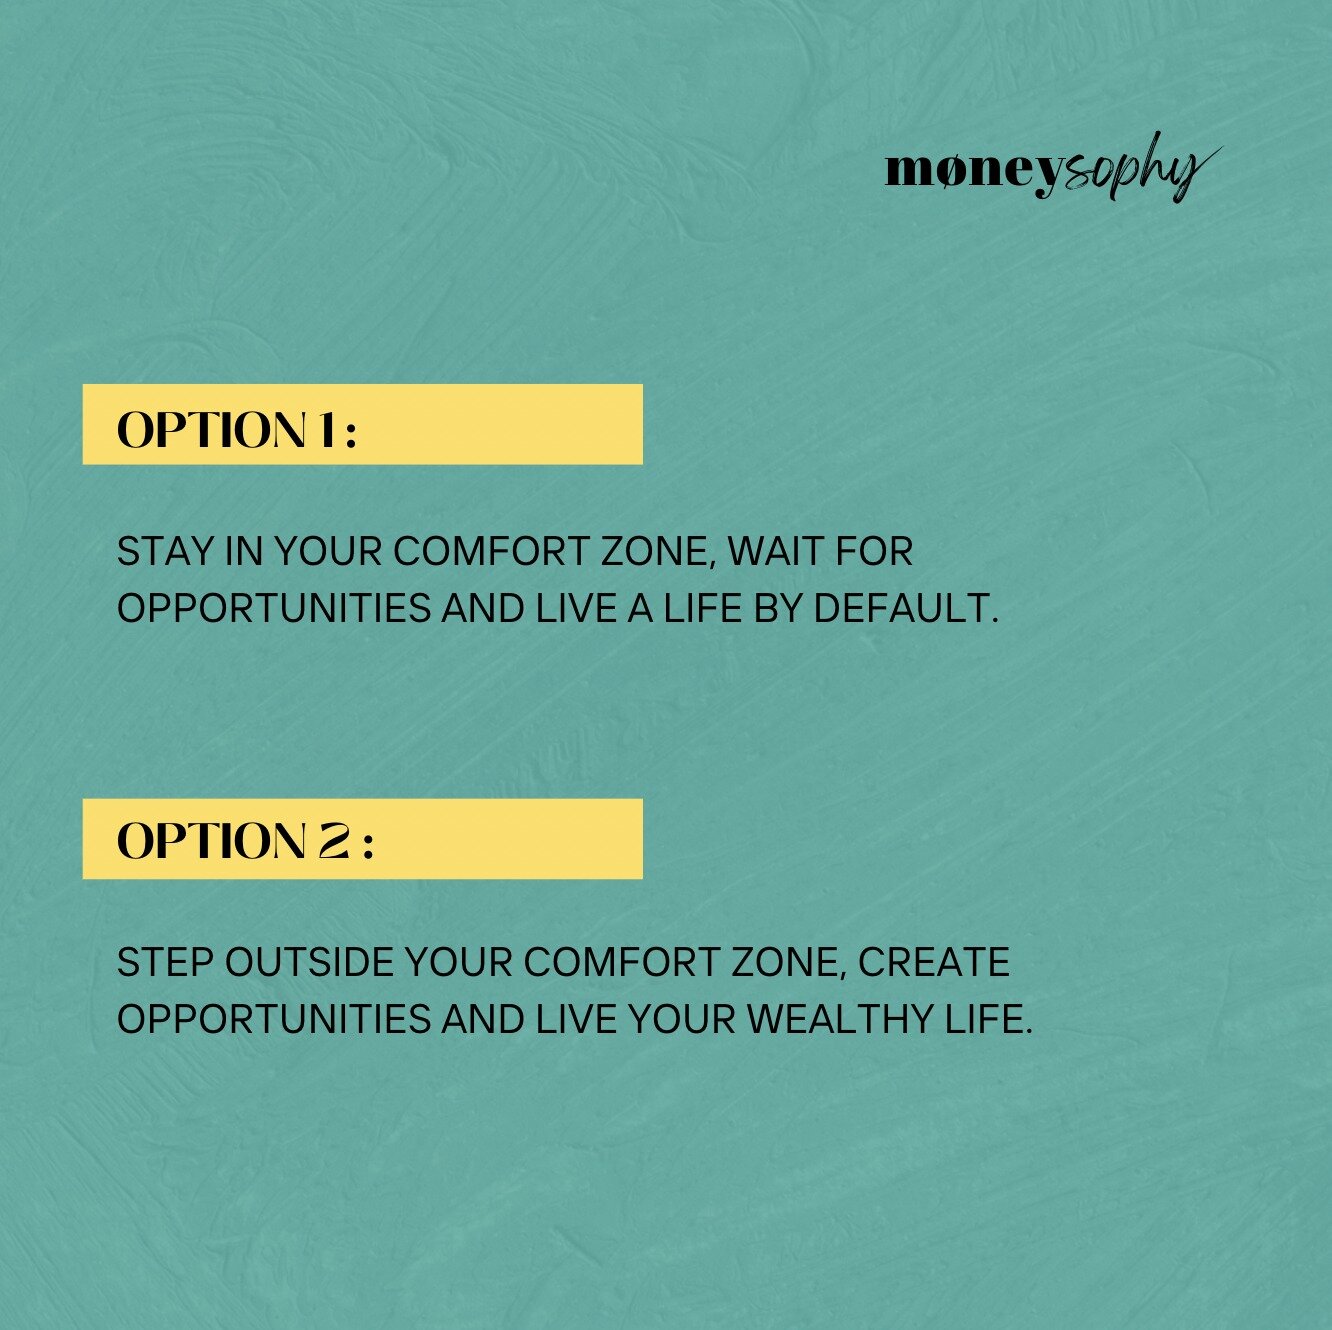 Which option would you choose? 

I would select Option #2 no matter what ✅

#moneycoach #financialeducation #bydesign #personaldevelopment #mindset #growthmindset #abundancemindset #growthquotes